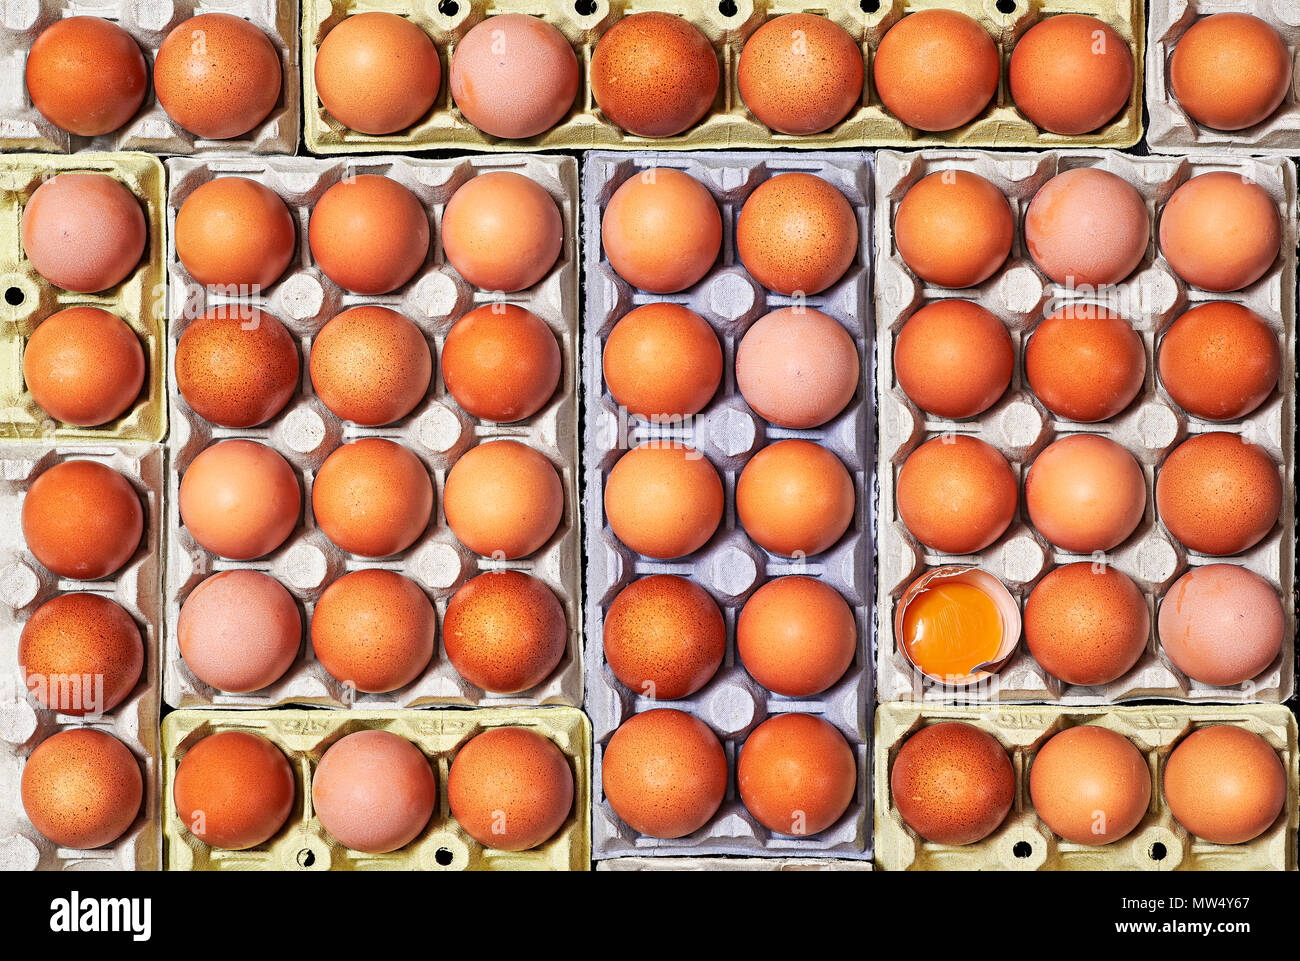 A lot of brown eggs and unique one egg cracked over a egg cartons. Stock Photo